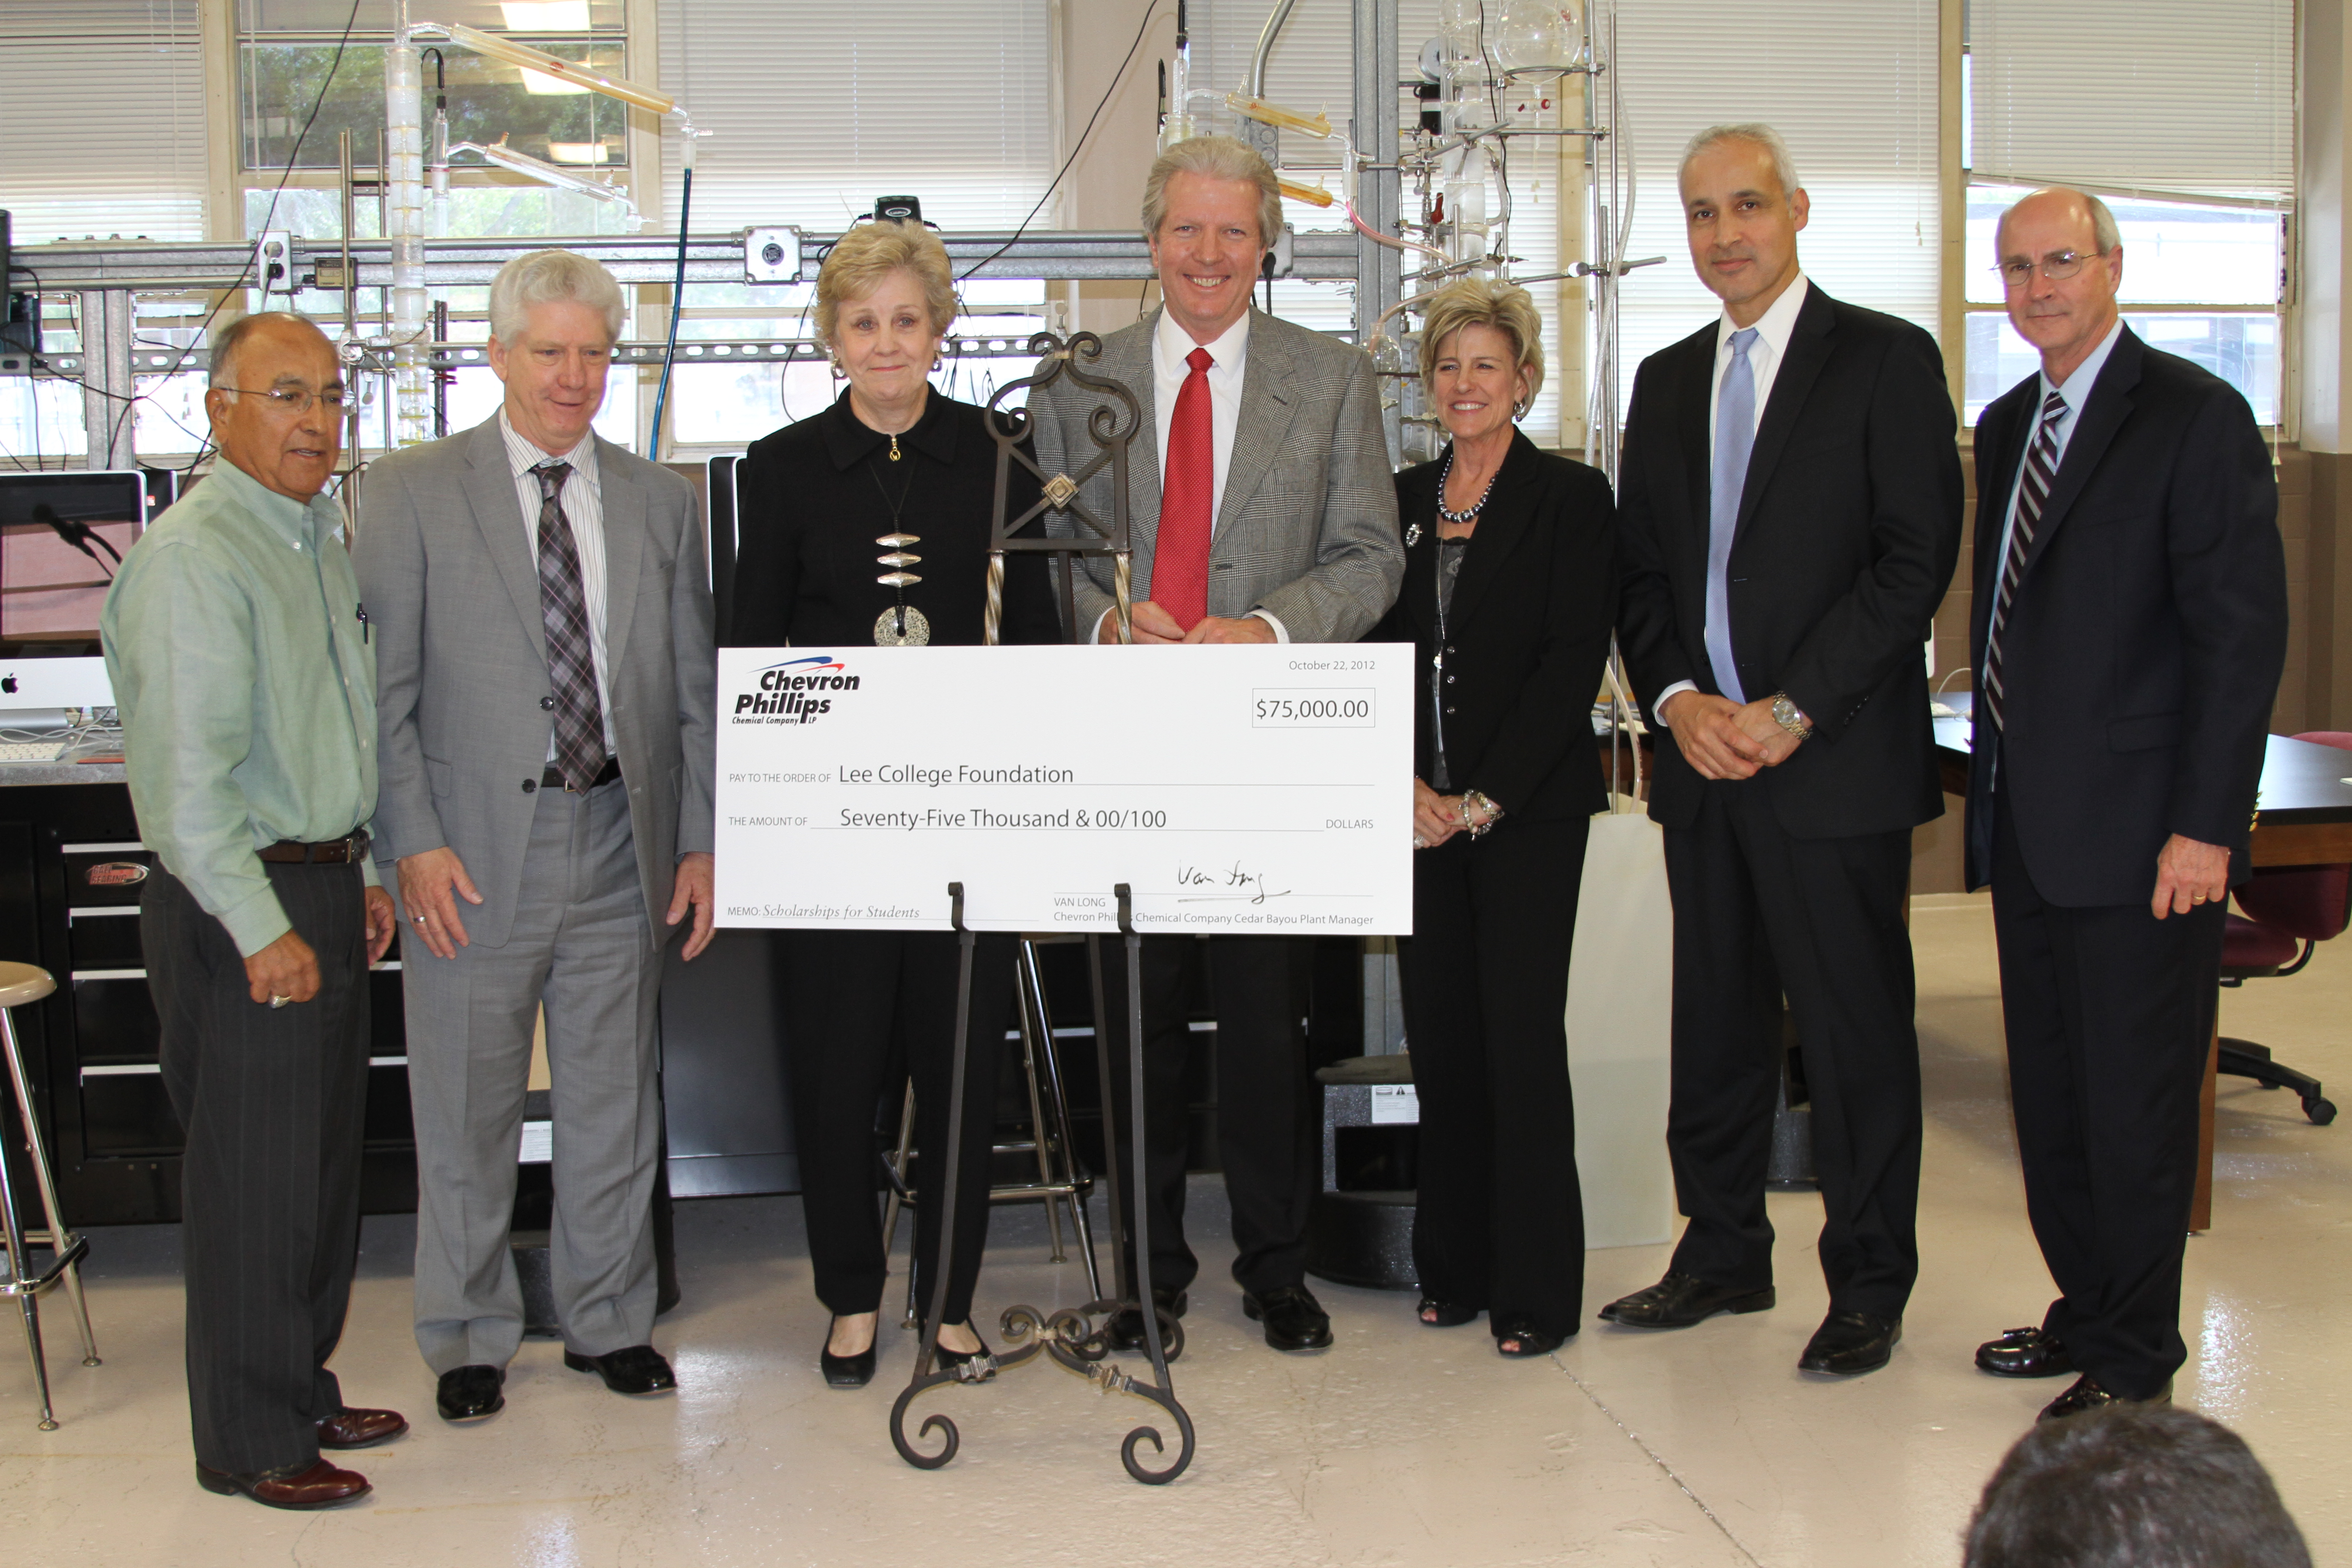 Chevron Phillips Chemical donates $75,000 to the Lee College Foundation.